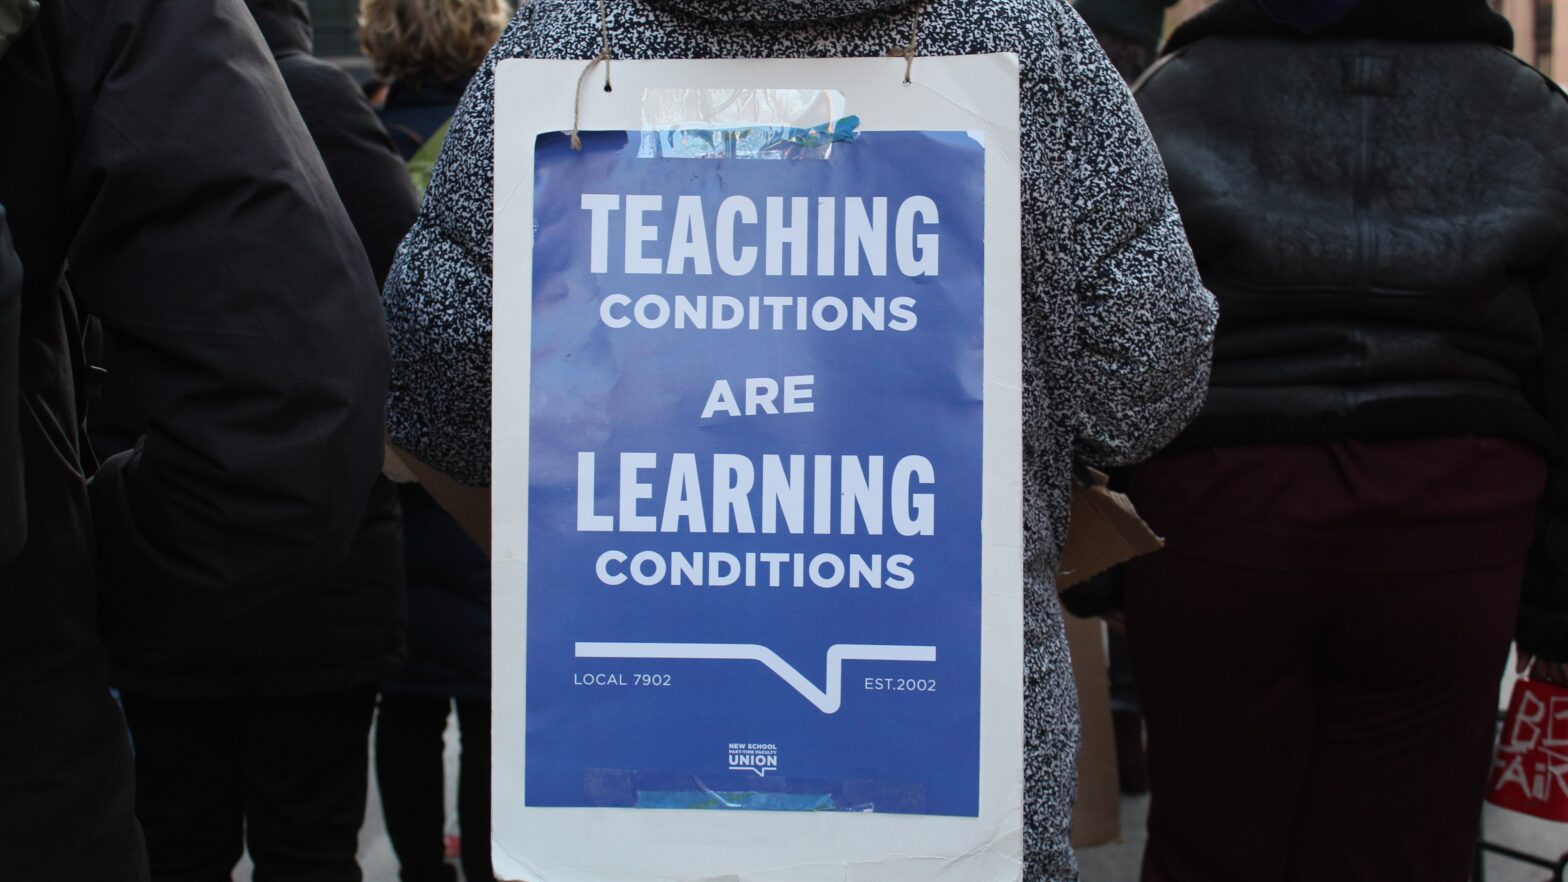 A blue and white sign reading “Teaching Conditions Are Learning Conditions” placed on the back of a protester.